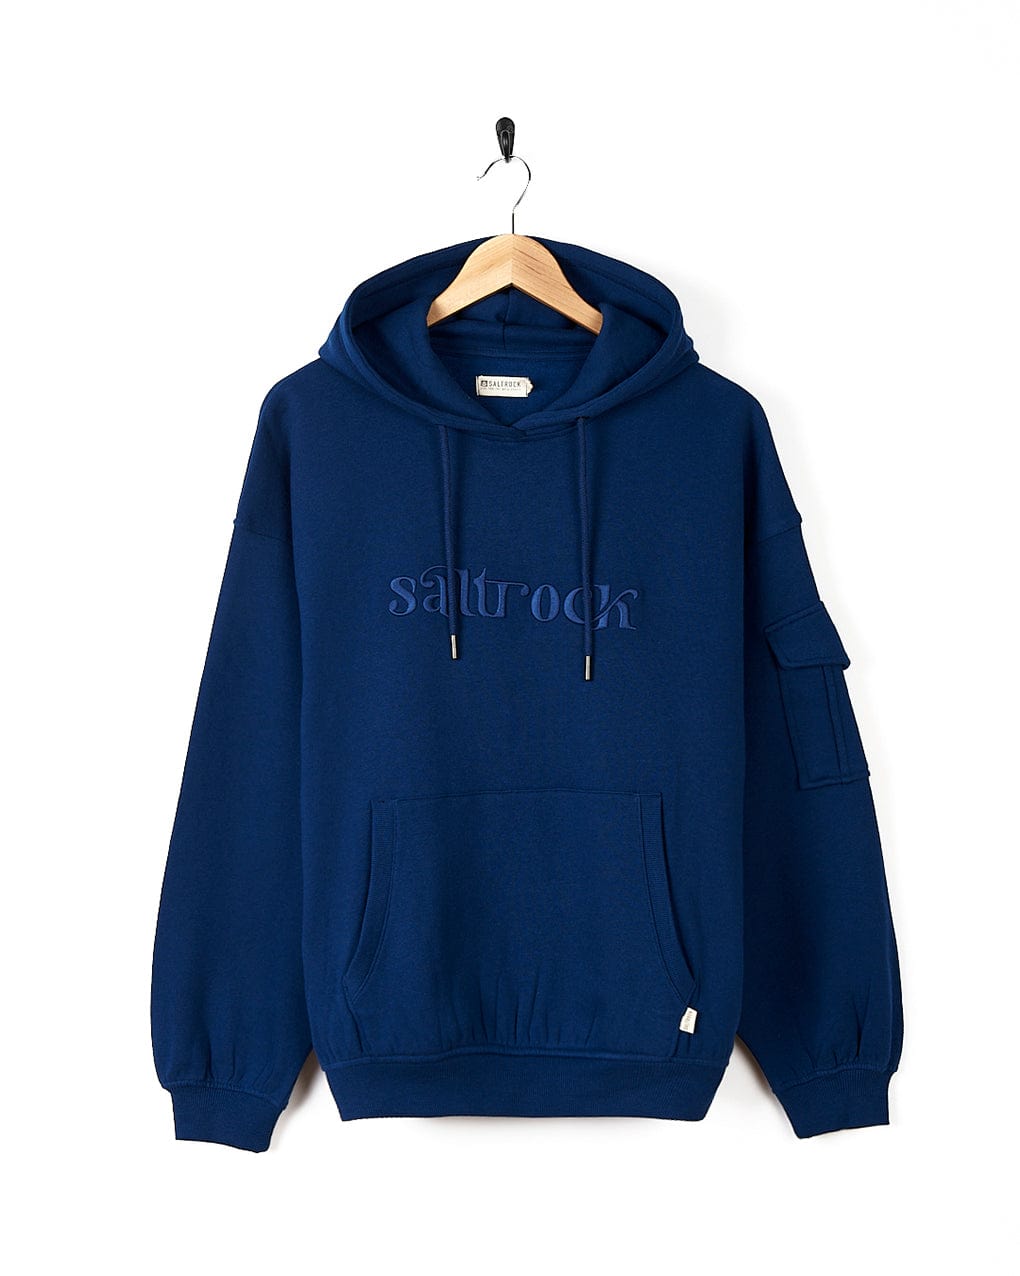 A Celeste - Womens Pop Hoodie - Blue with the Saltrock branding and an embroidered logo.